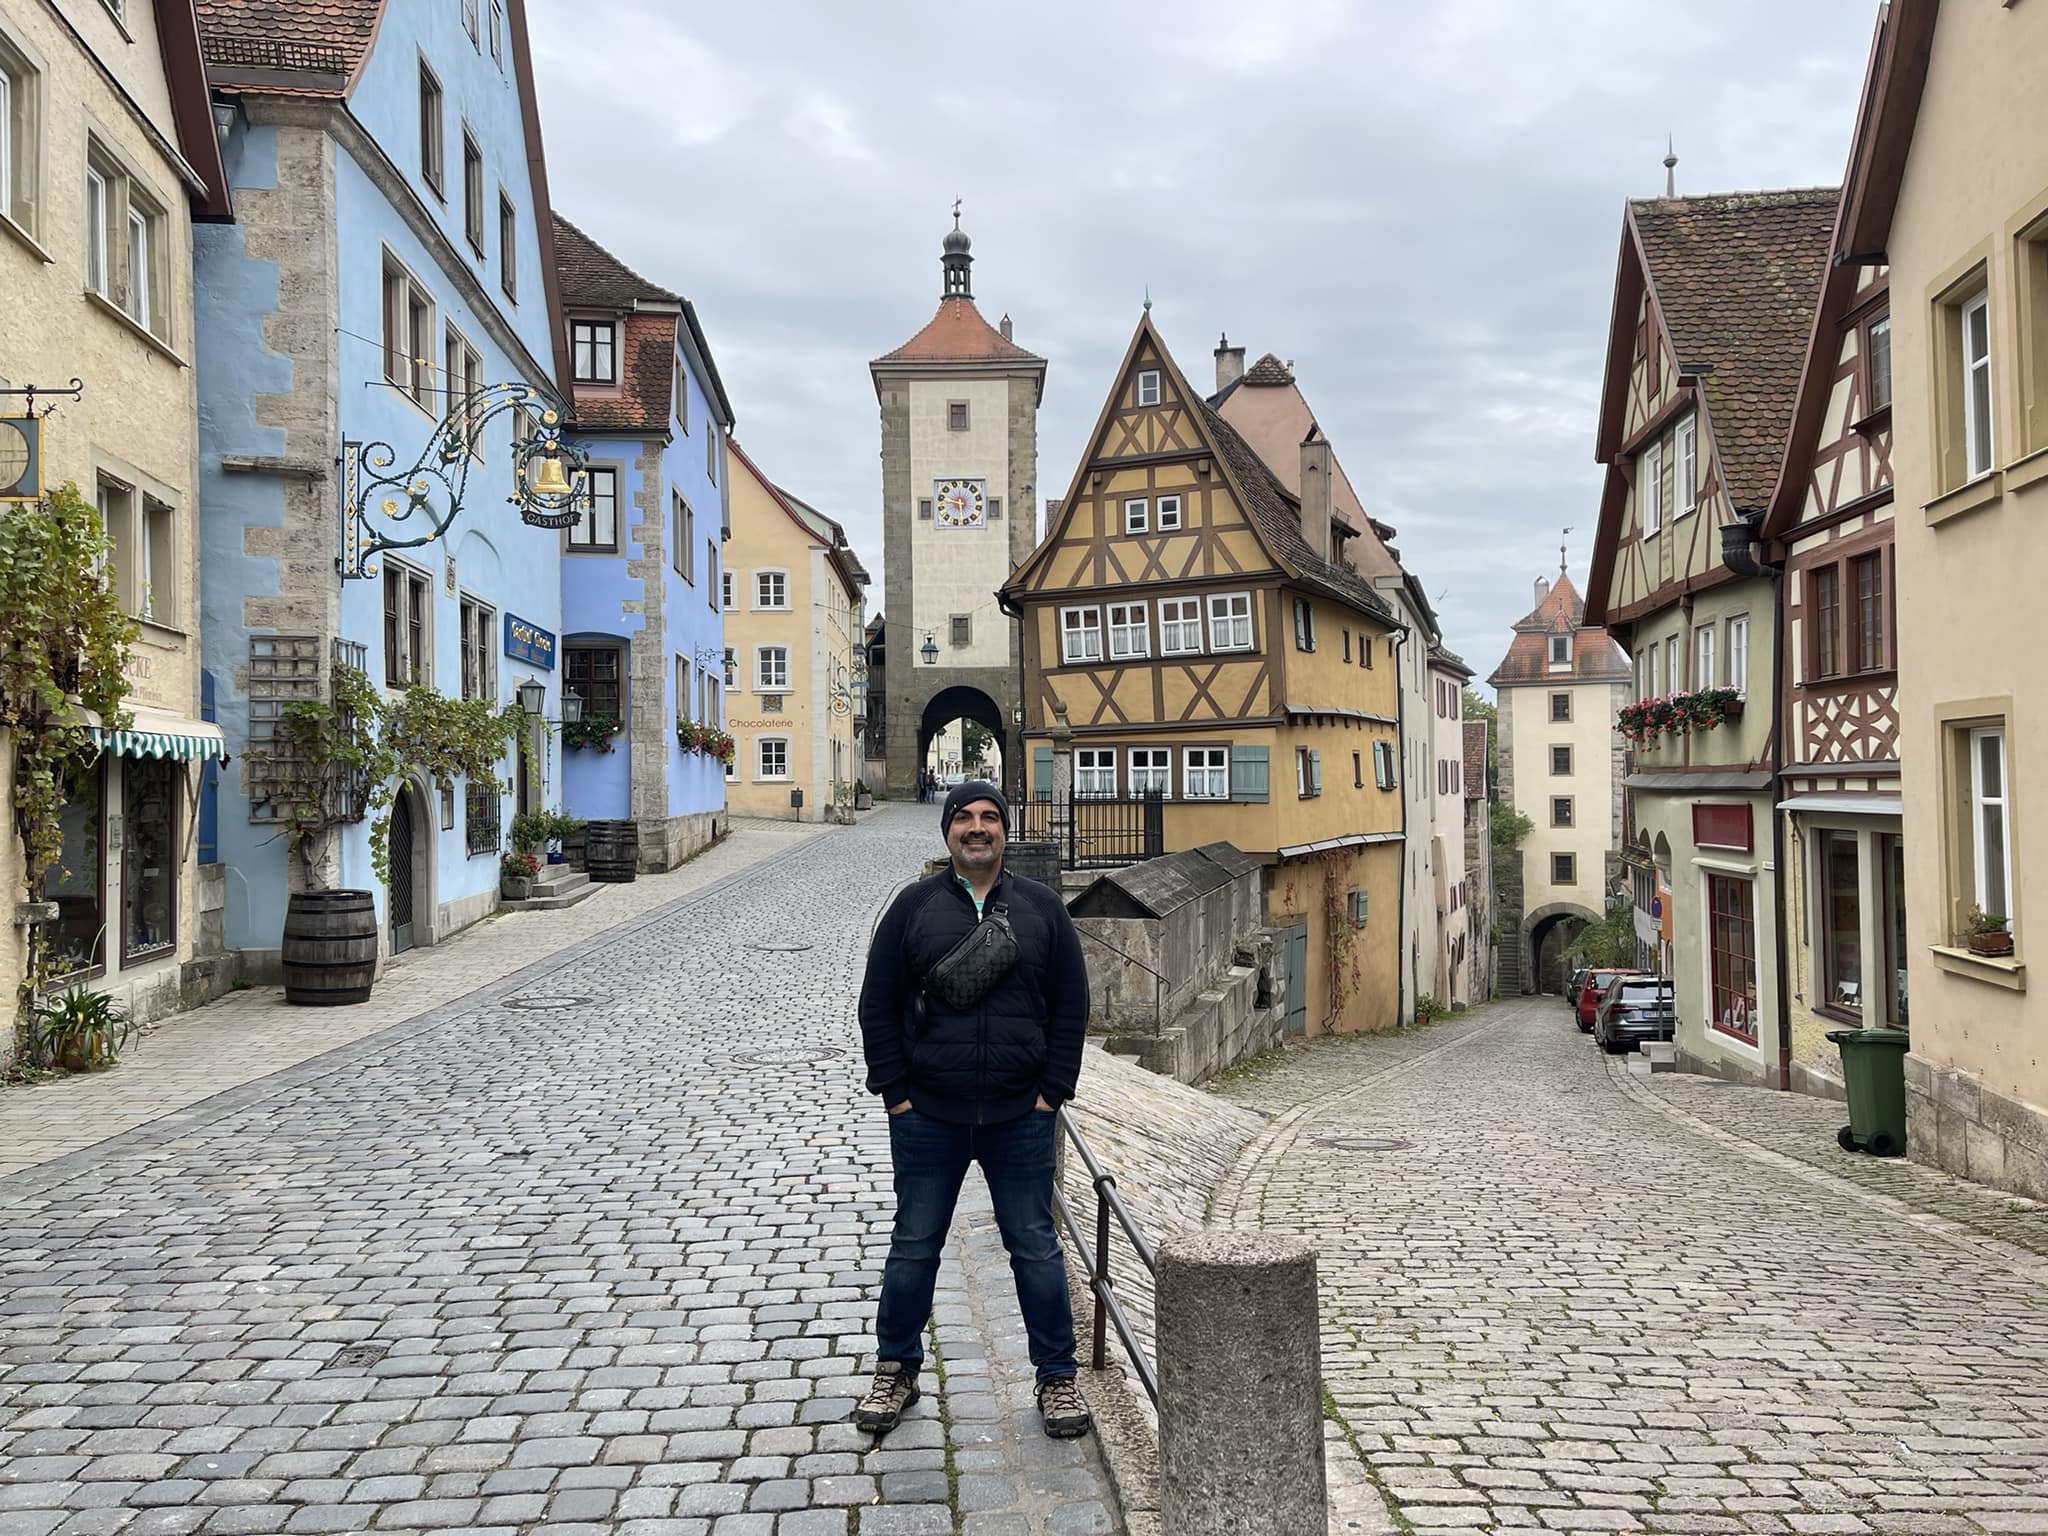 Me standing in front of the The Plönlein, a famous landmark in Rothenburg ob der Tauber